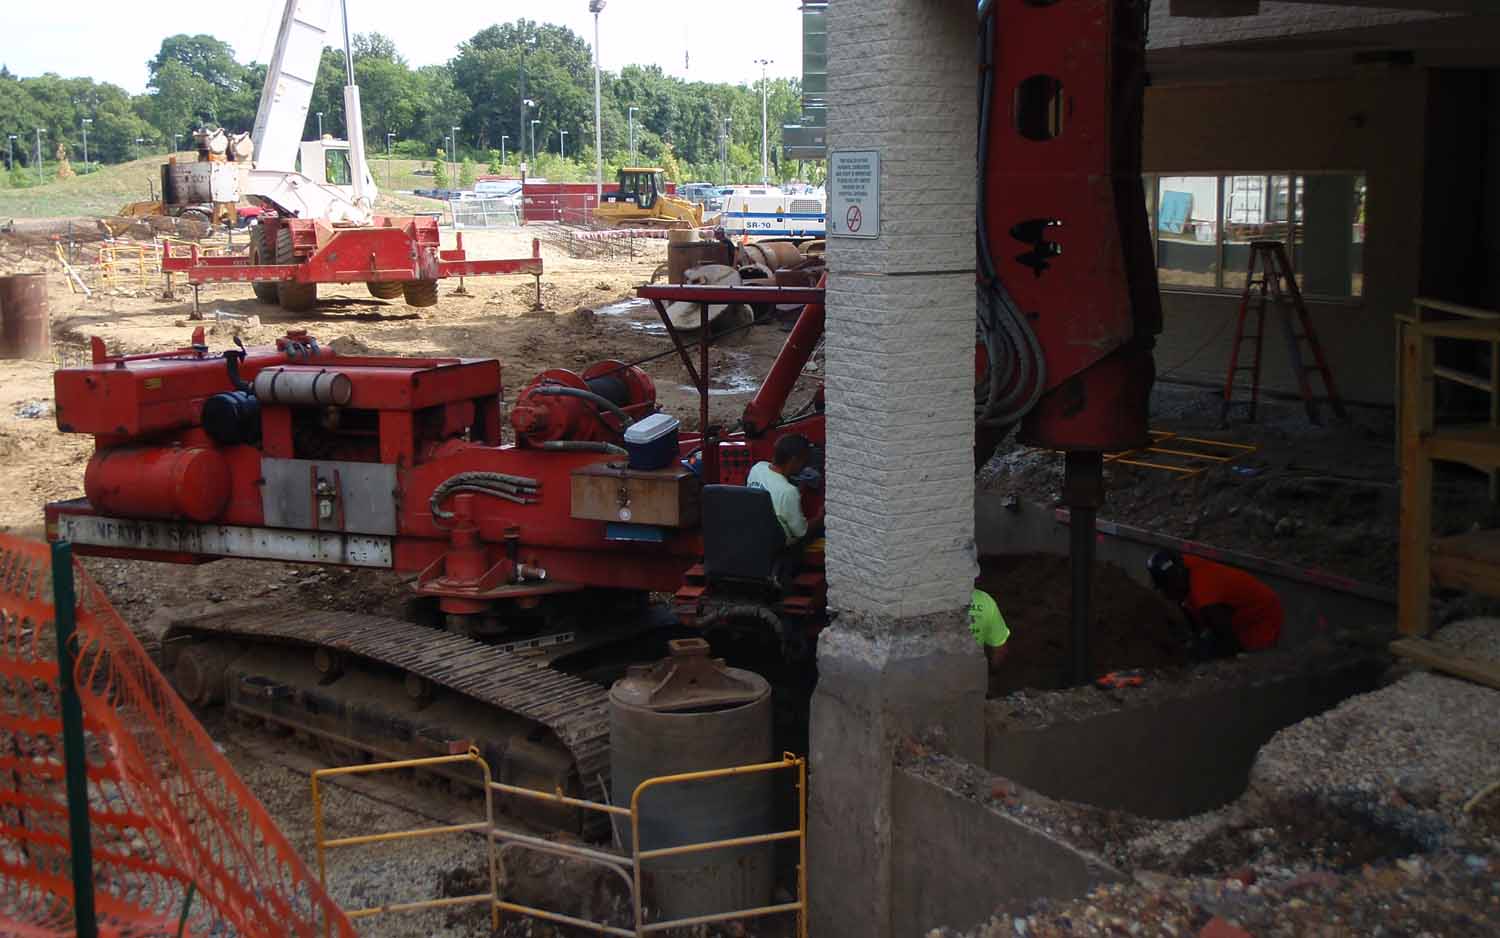 Foundation Structures is a drilling company in Philadelphia specializing in caissons, foundation drilling, drilled piers, drilled shafts, and drilled holes.